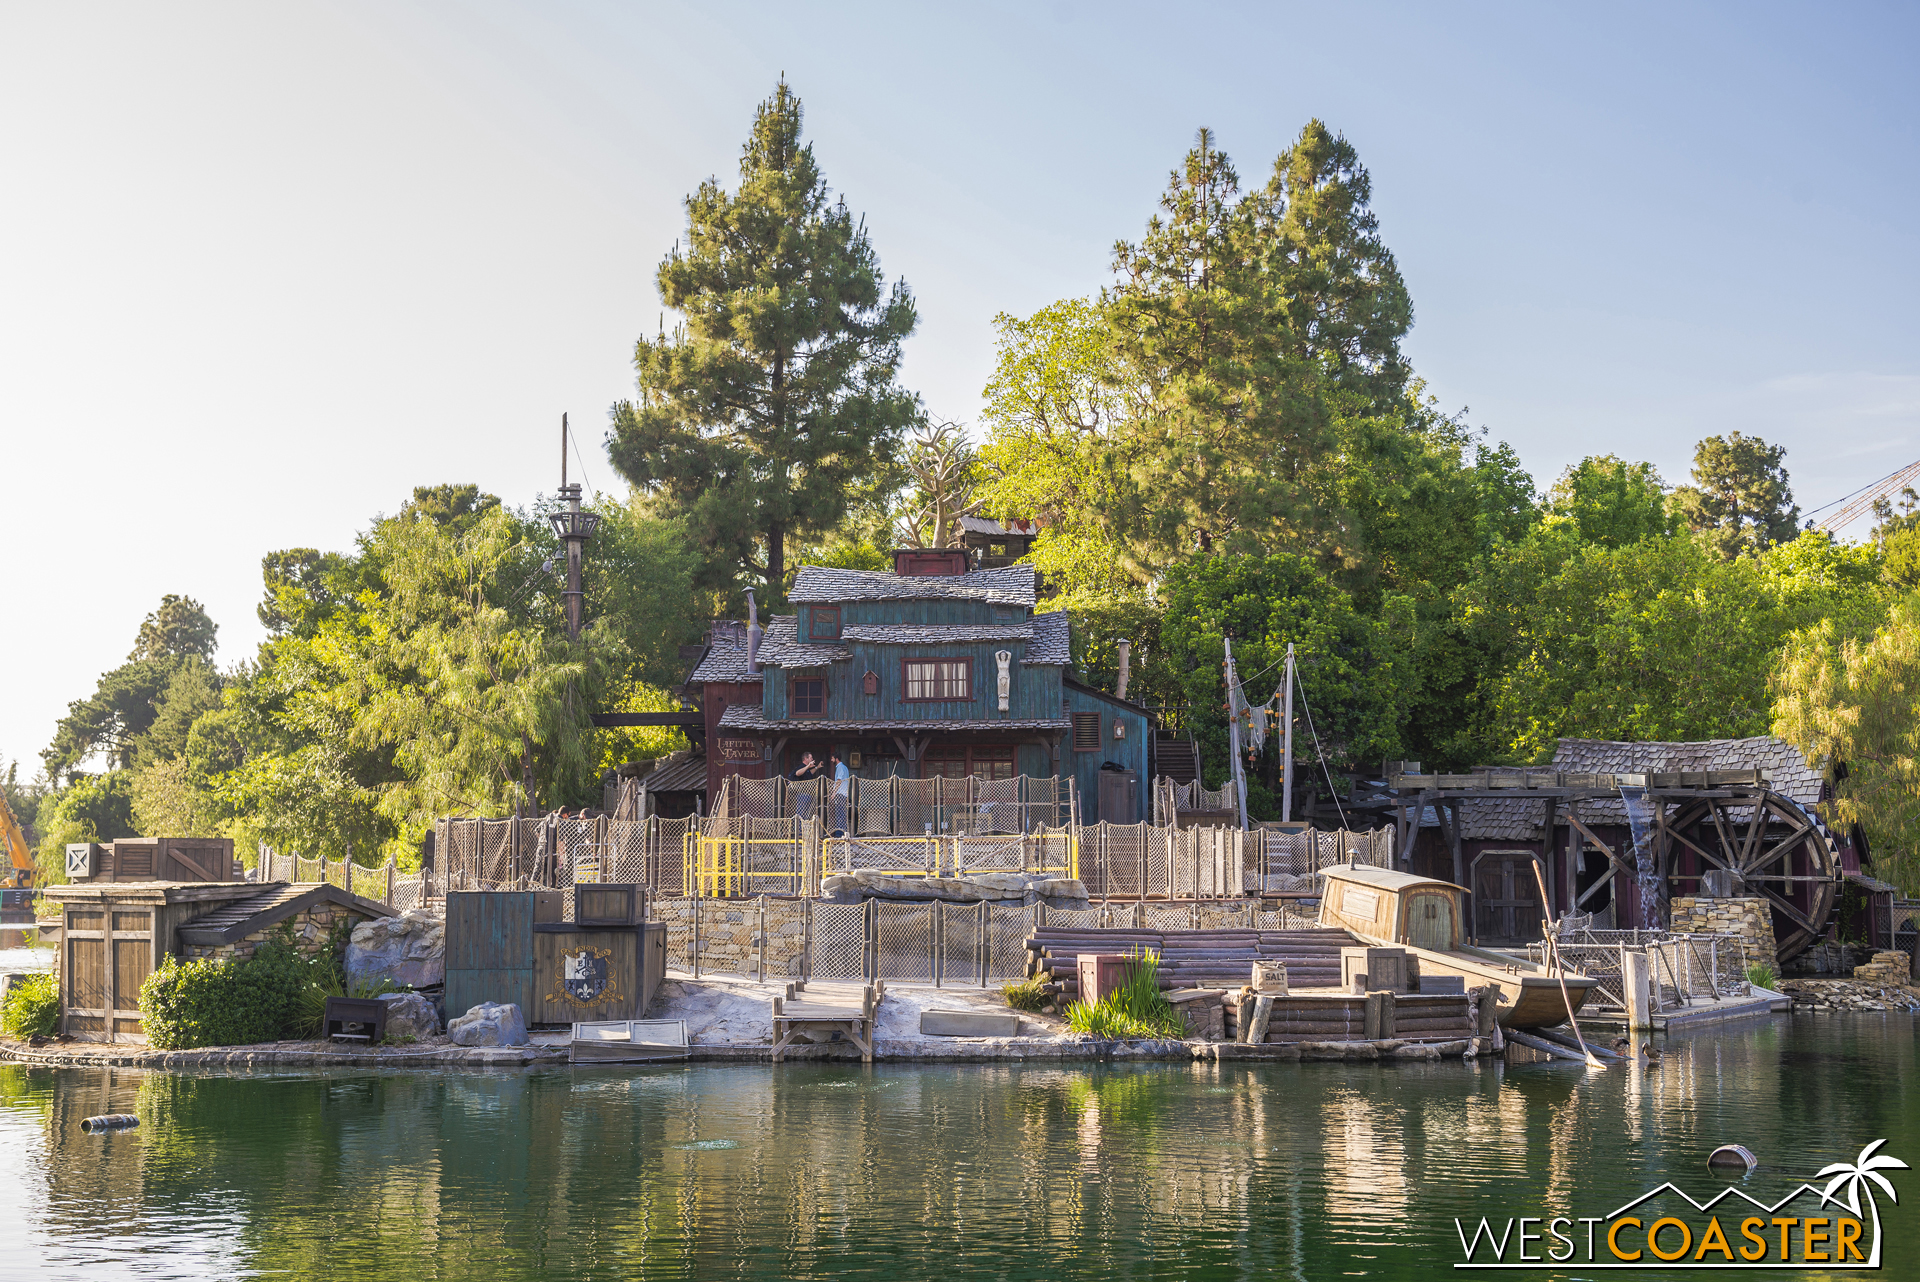  Workers were on hand Friday to work on the FANTASMIC! stage area of Tom Sawyer Island. 